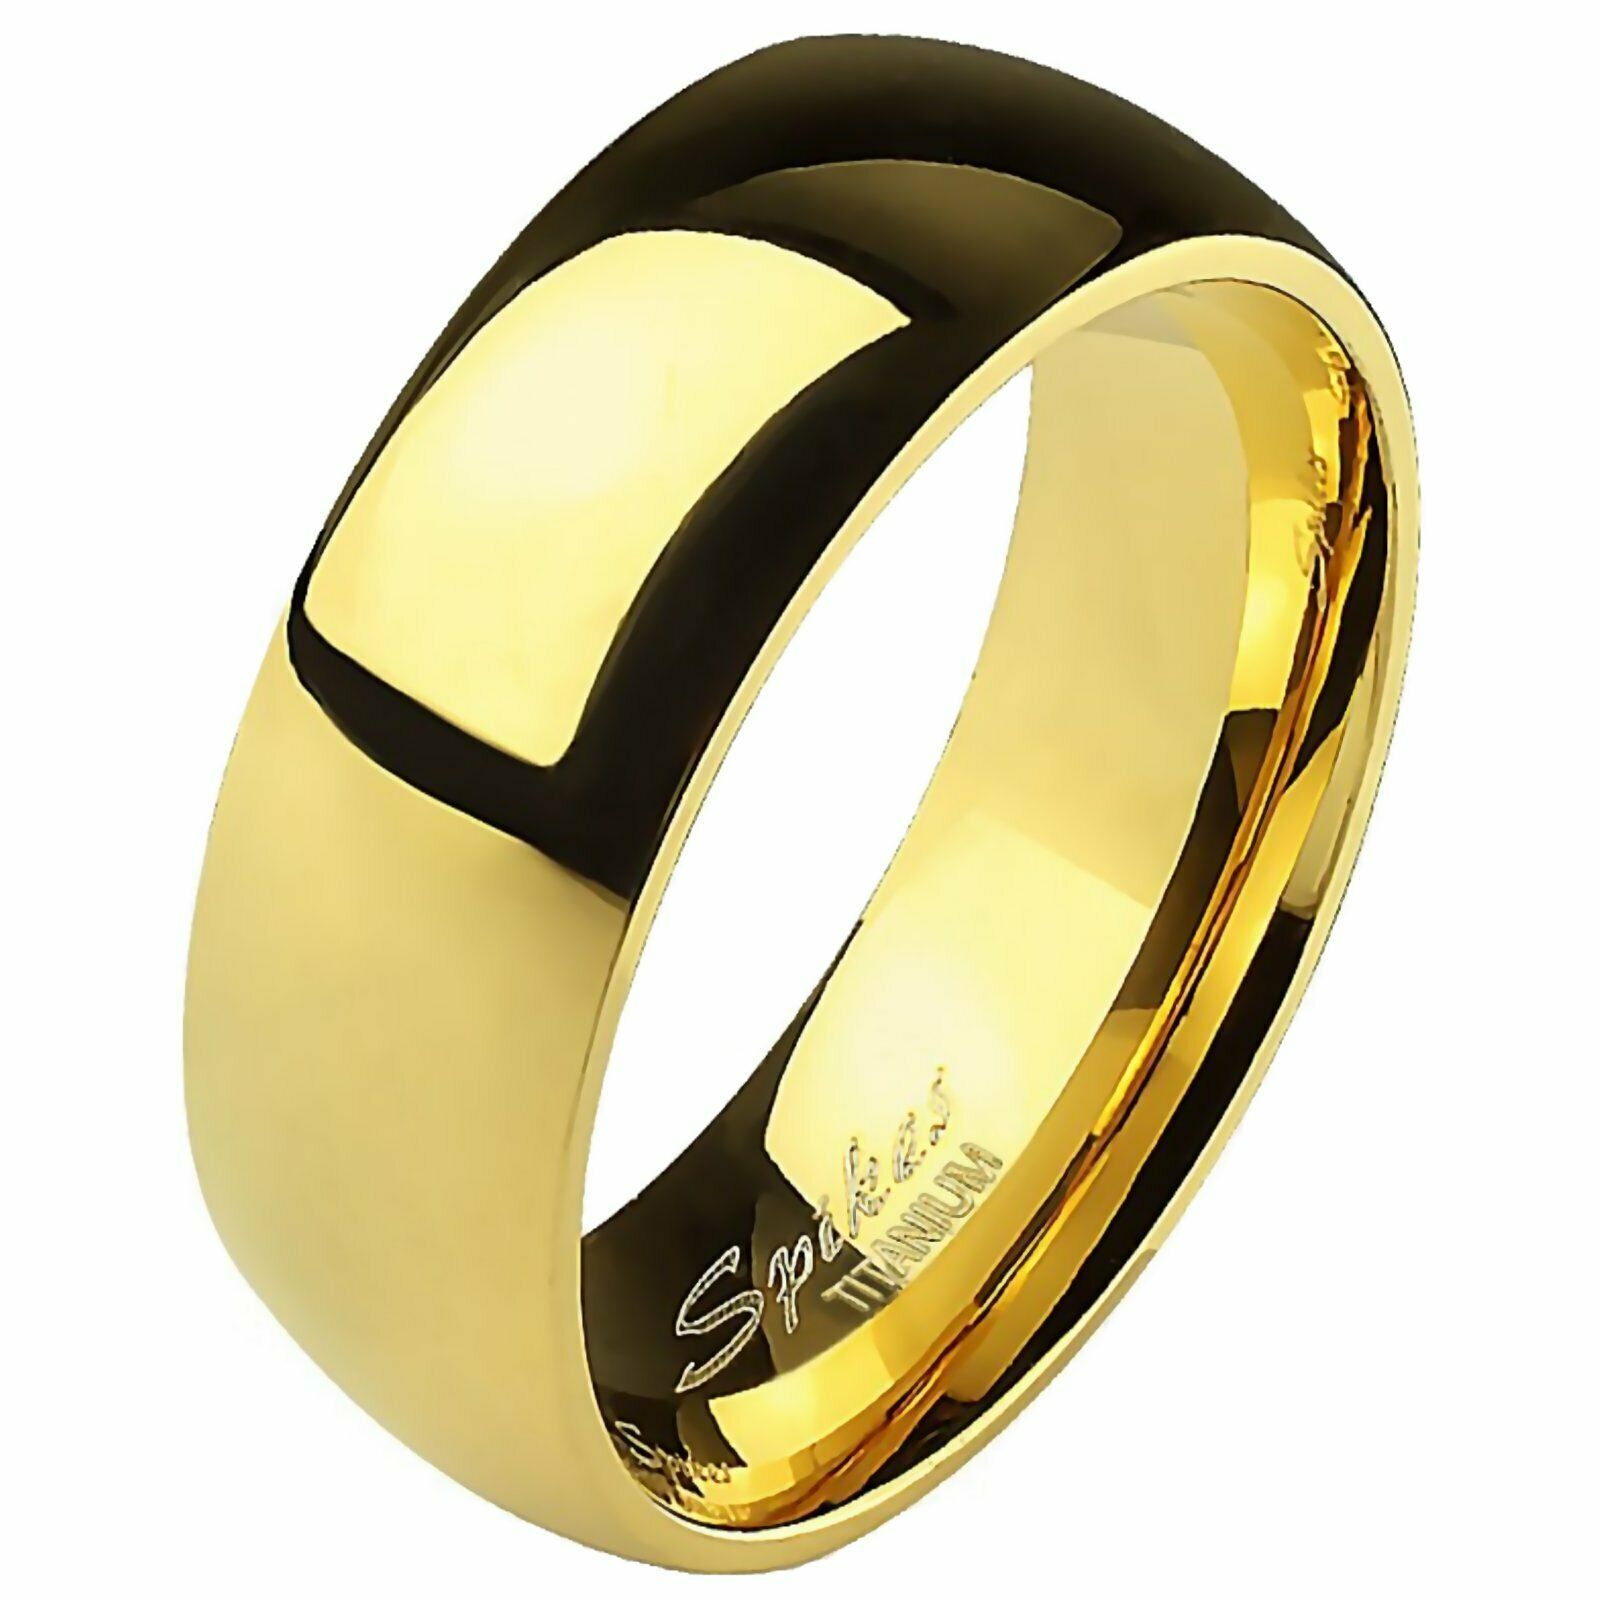 Primary image for Traditional Titanium Ring Gold Wedding Band Sizes 5-13 6mm Anniversary